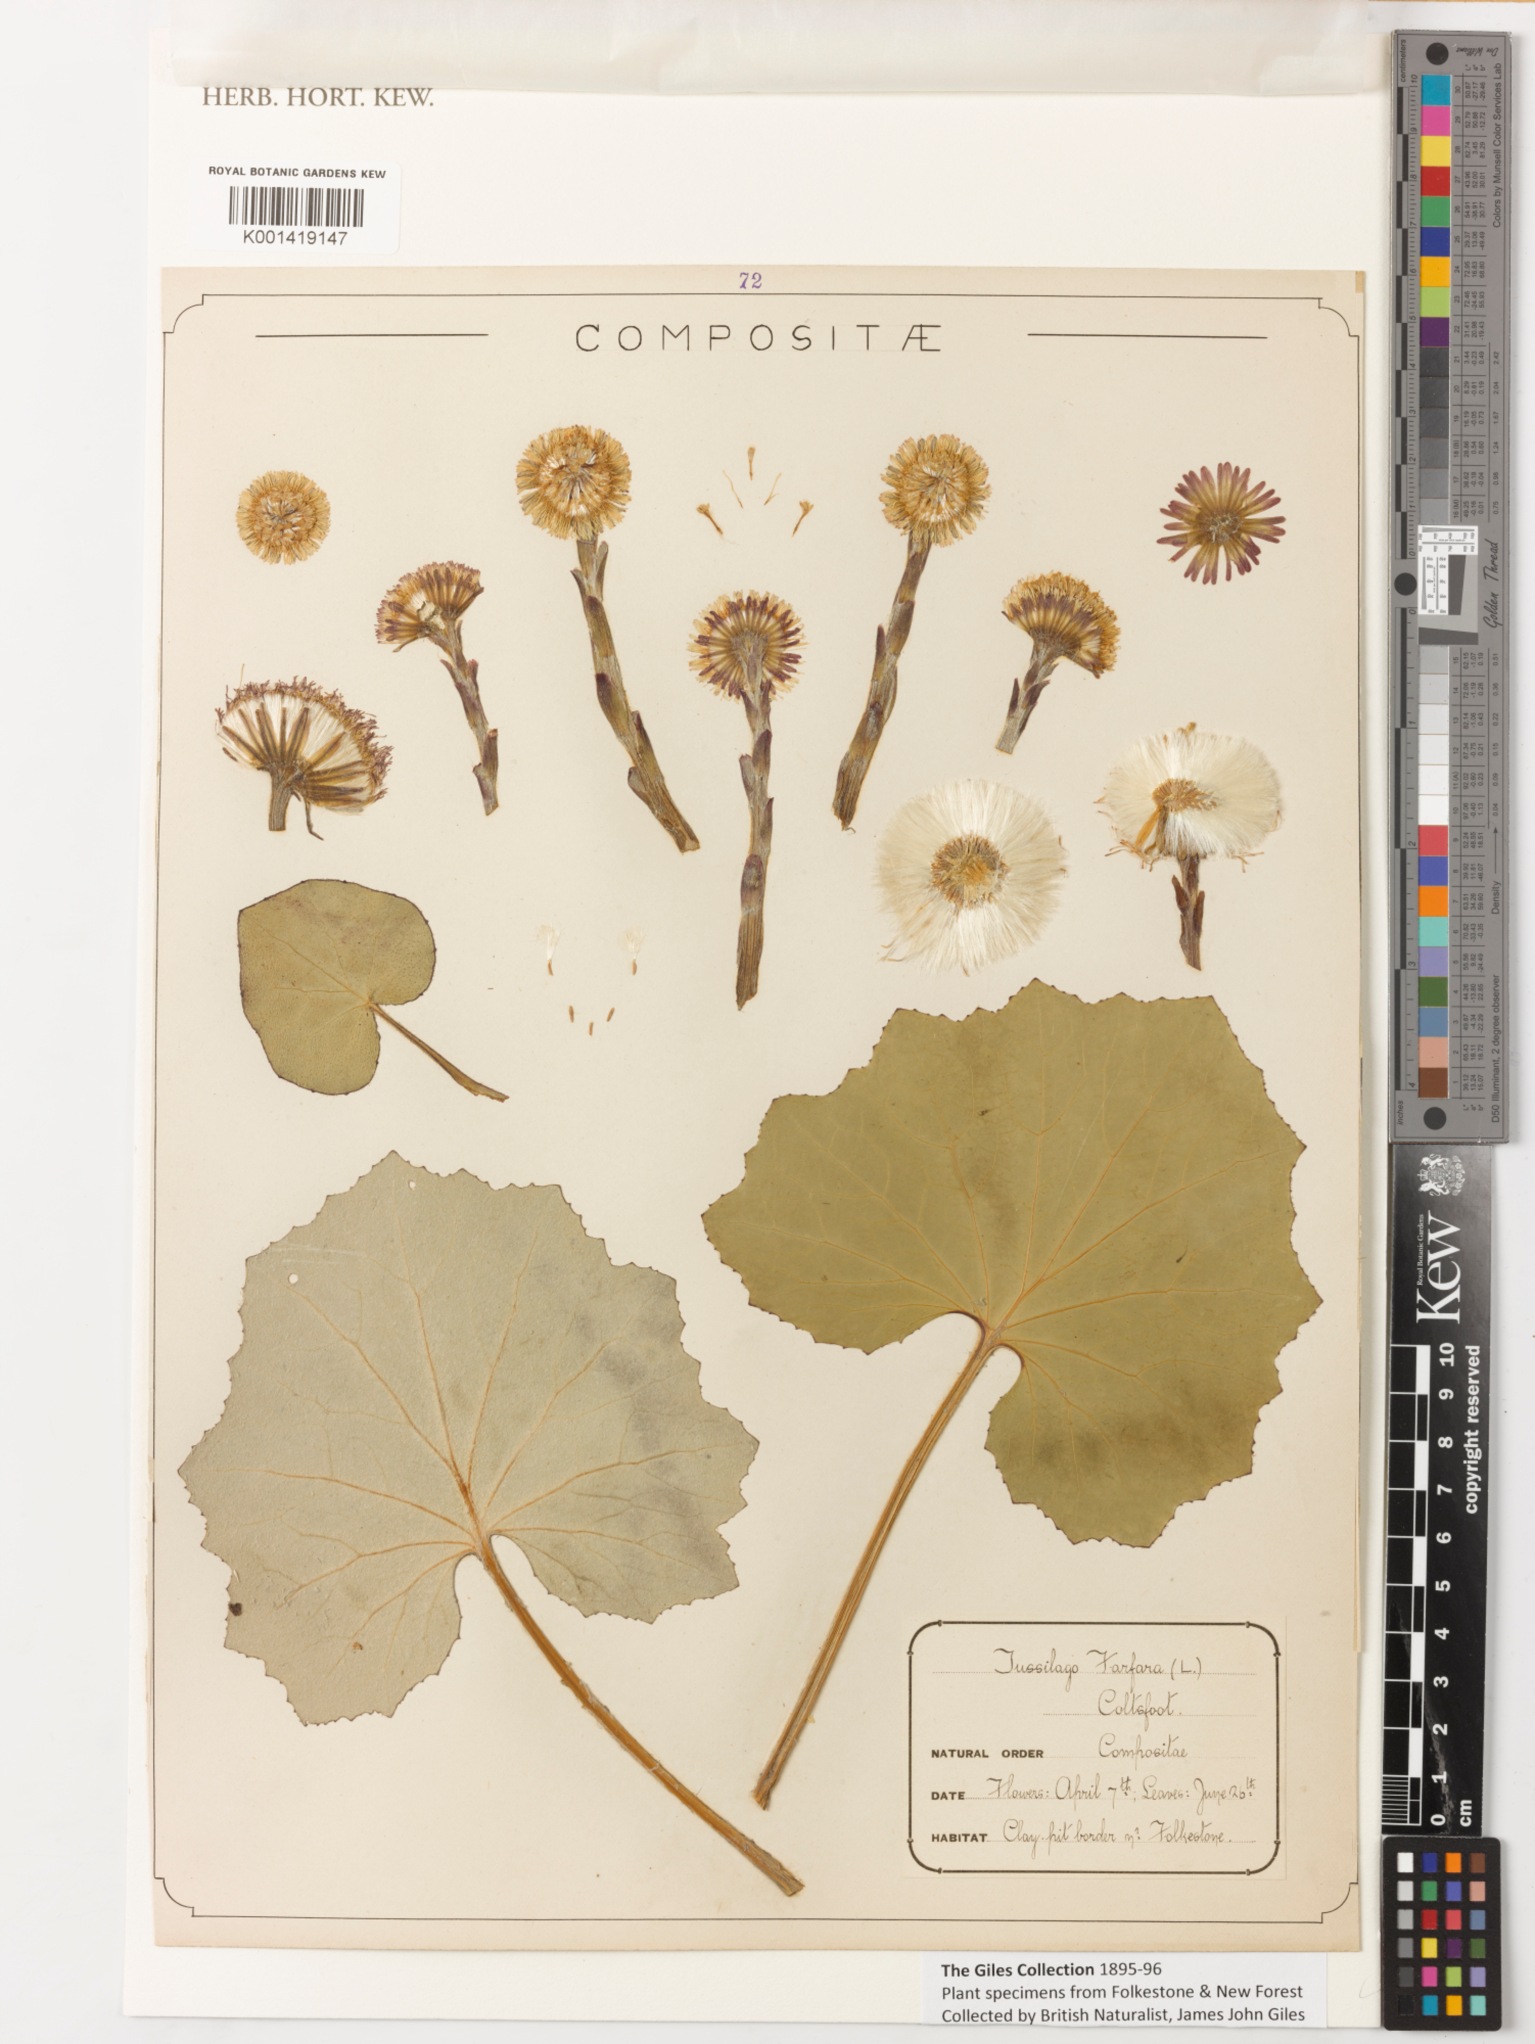 Dried pressed coltsfoot specimens mounted on herbarium paper